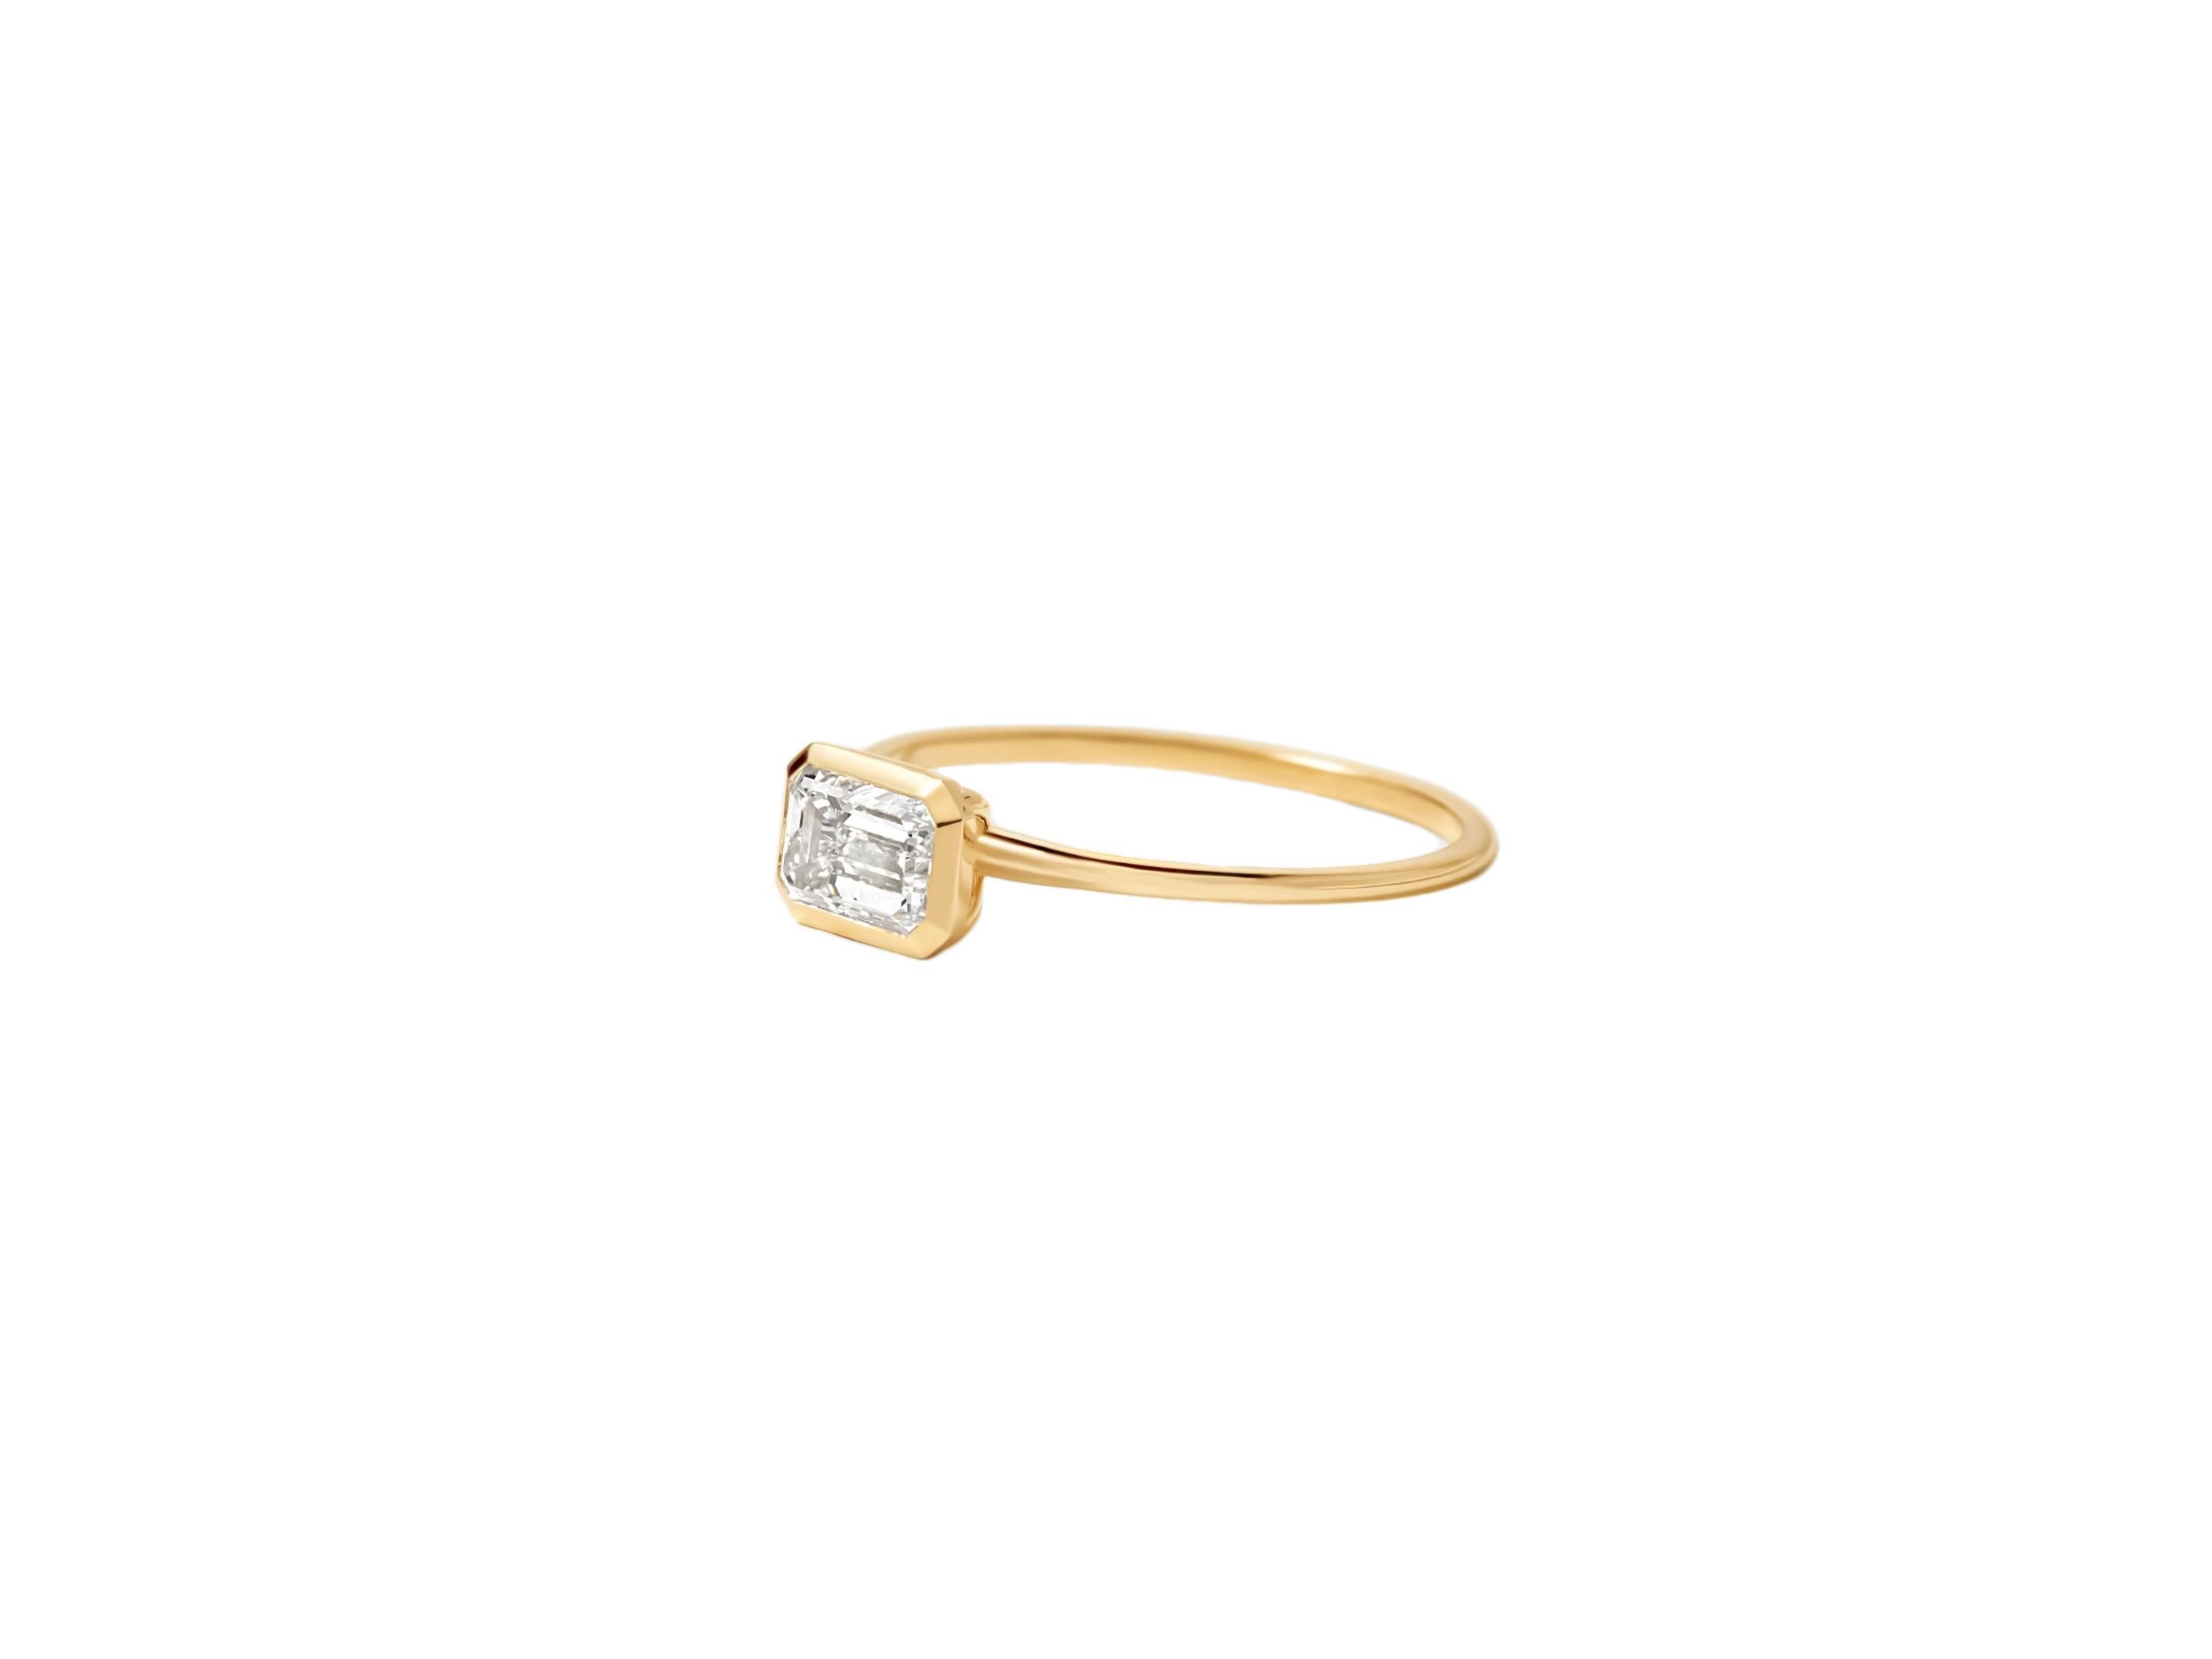 East to West emerald cut moissanite ring. Horisontal emerald moissanite ring. Delicate 14k gold ring with emerald cut moissanite. Emerald moissanite 14k gold ring. Moissanite solitaire ring. Plain moissanite ring. Diamond cut moissanite ring.